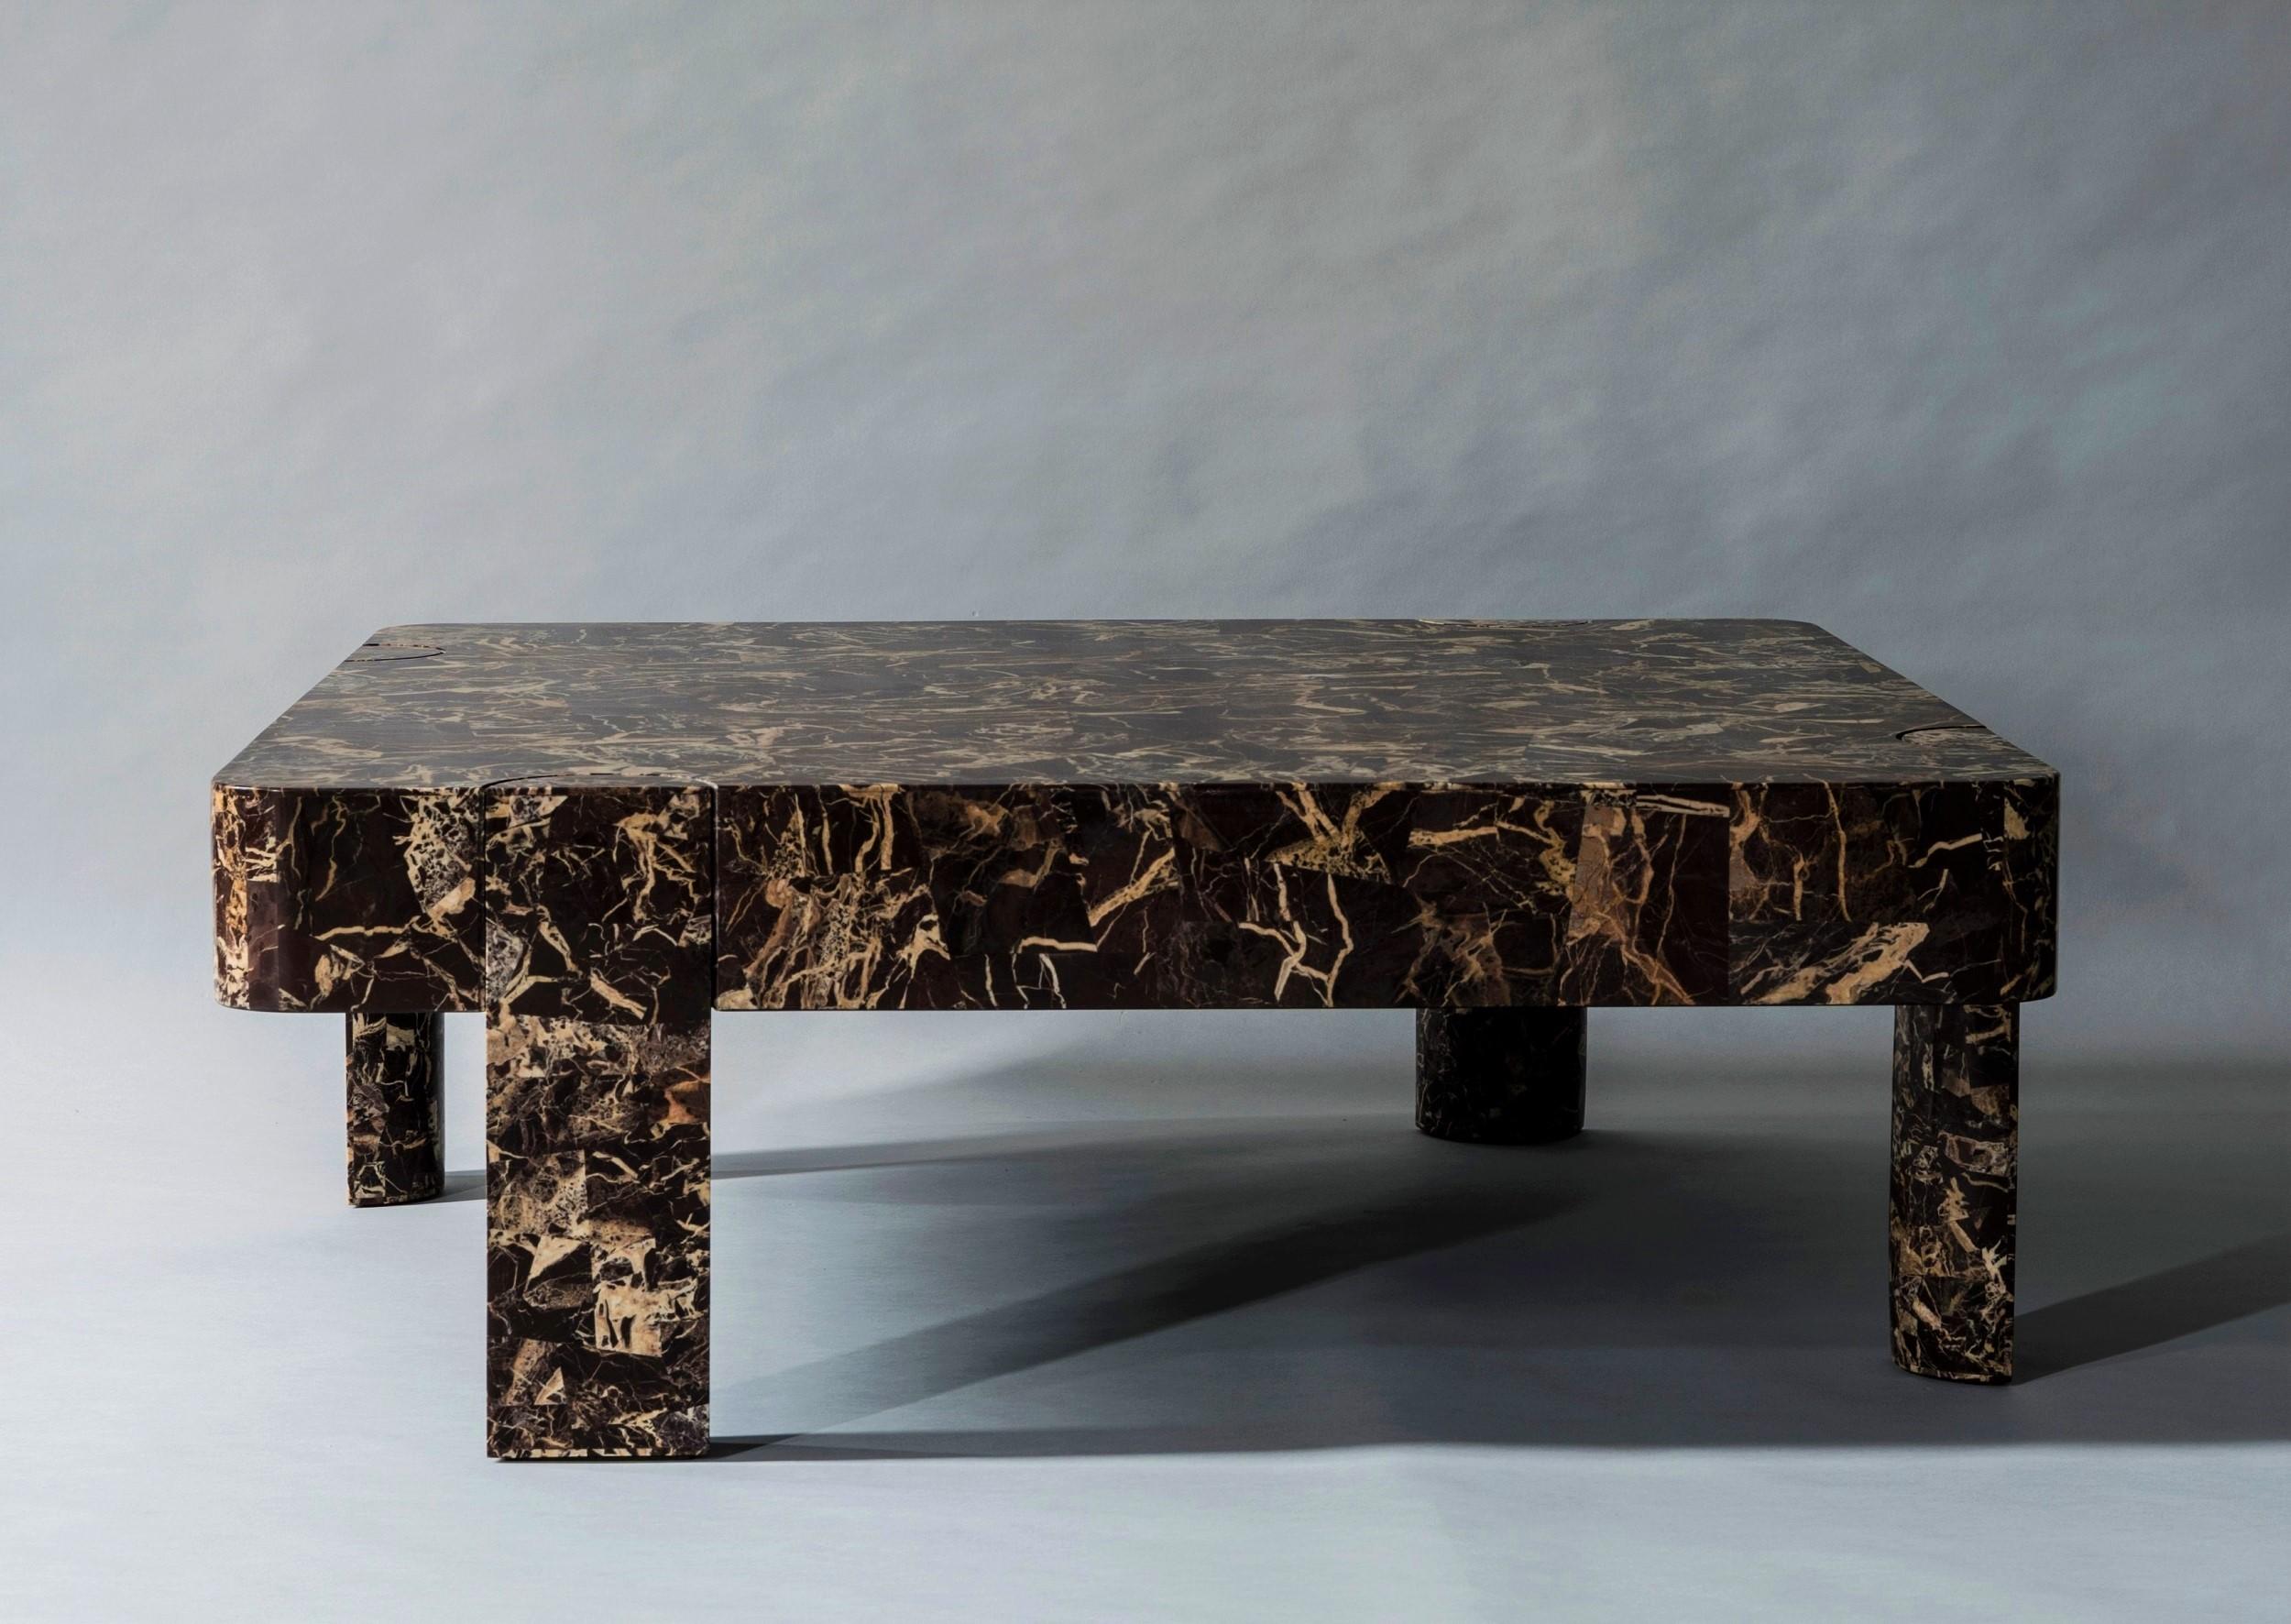 The Demi Collection gets its name from the irregularly placed cylindrical legs that are bisected and inset into its rounded tops, forming a half-circle at each joint. Exquisite stone marquetry comprising rare finishes such as claret dolomite,